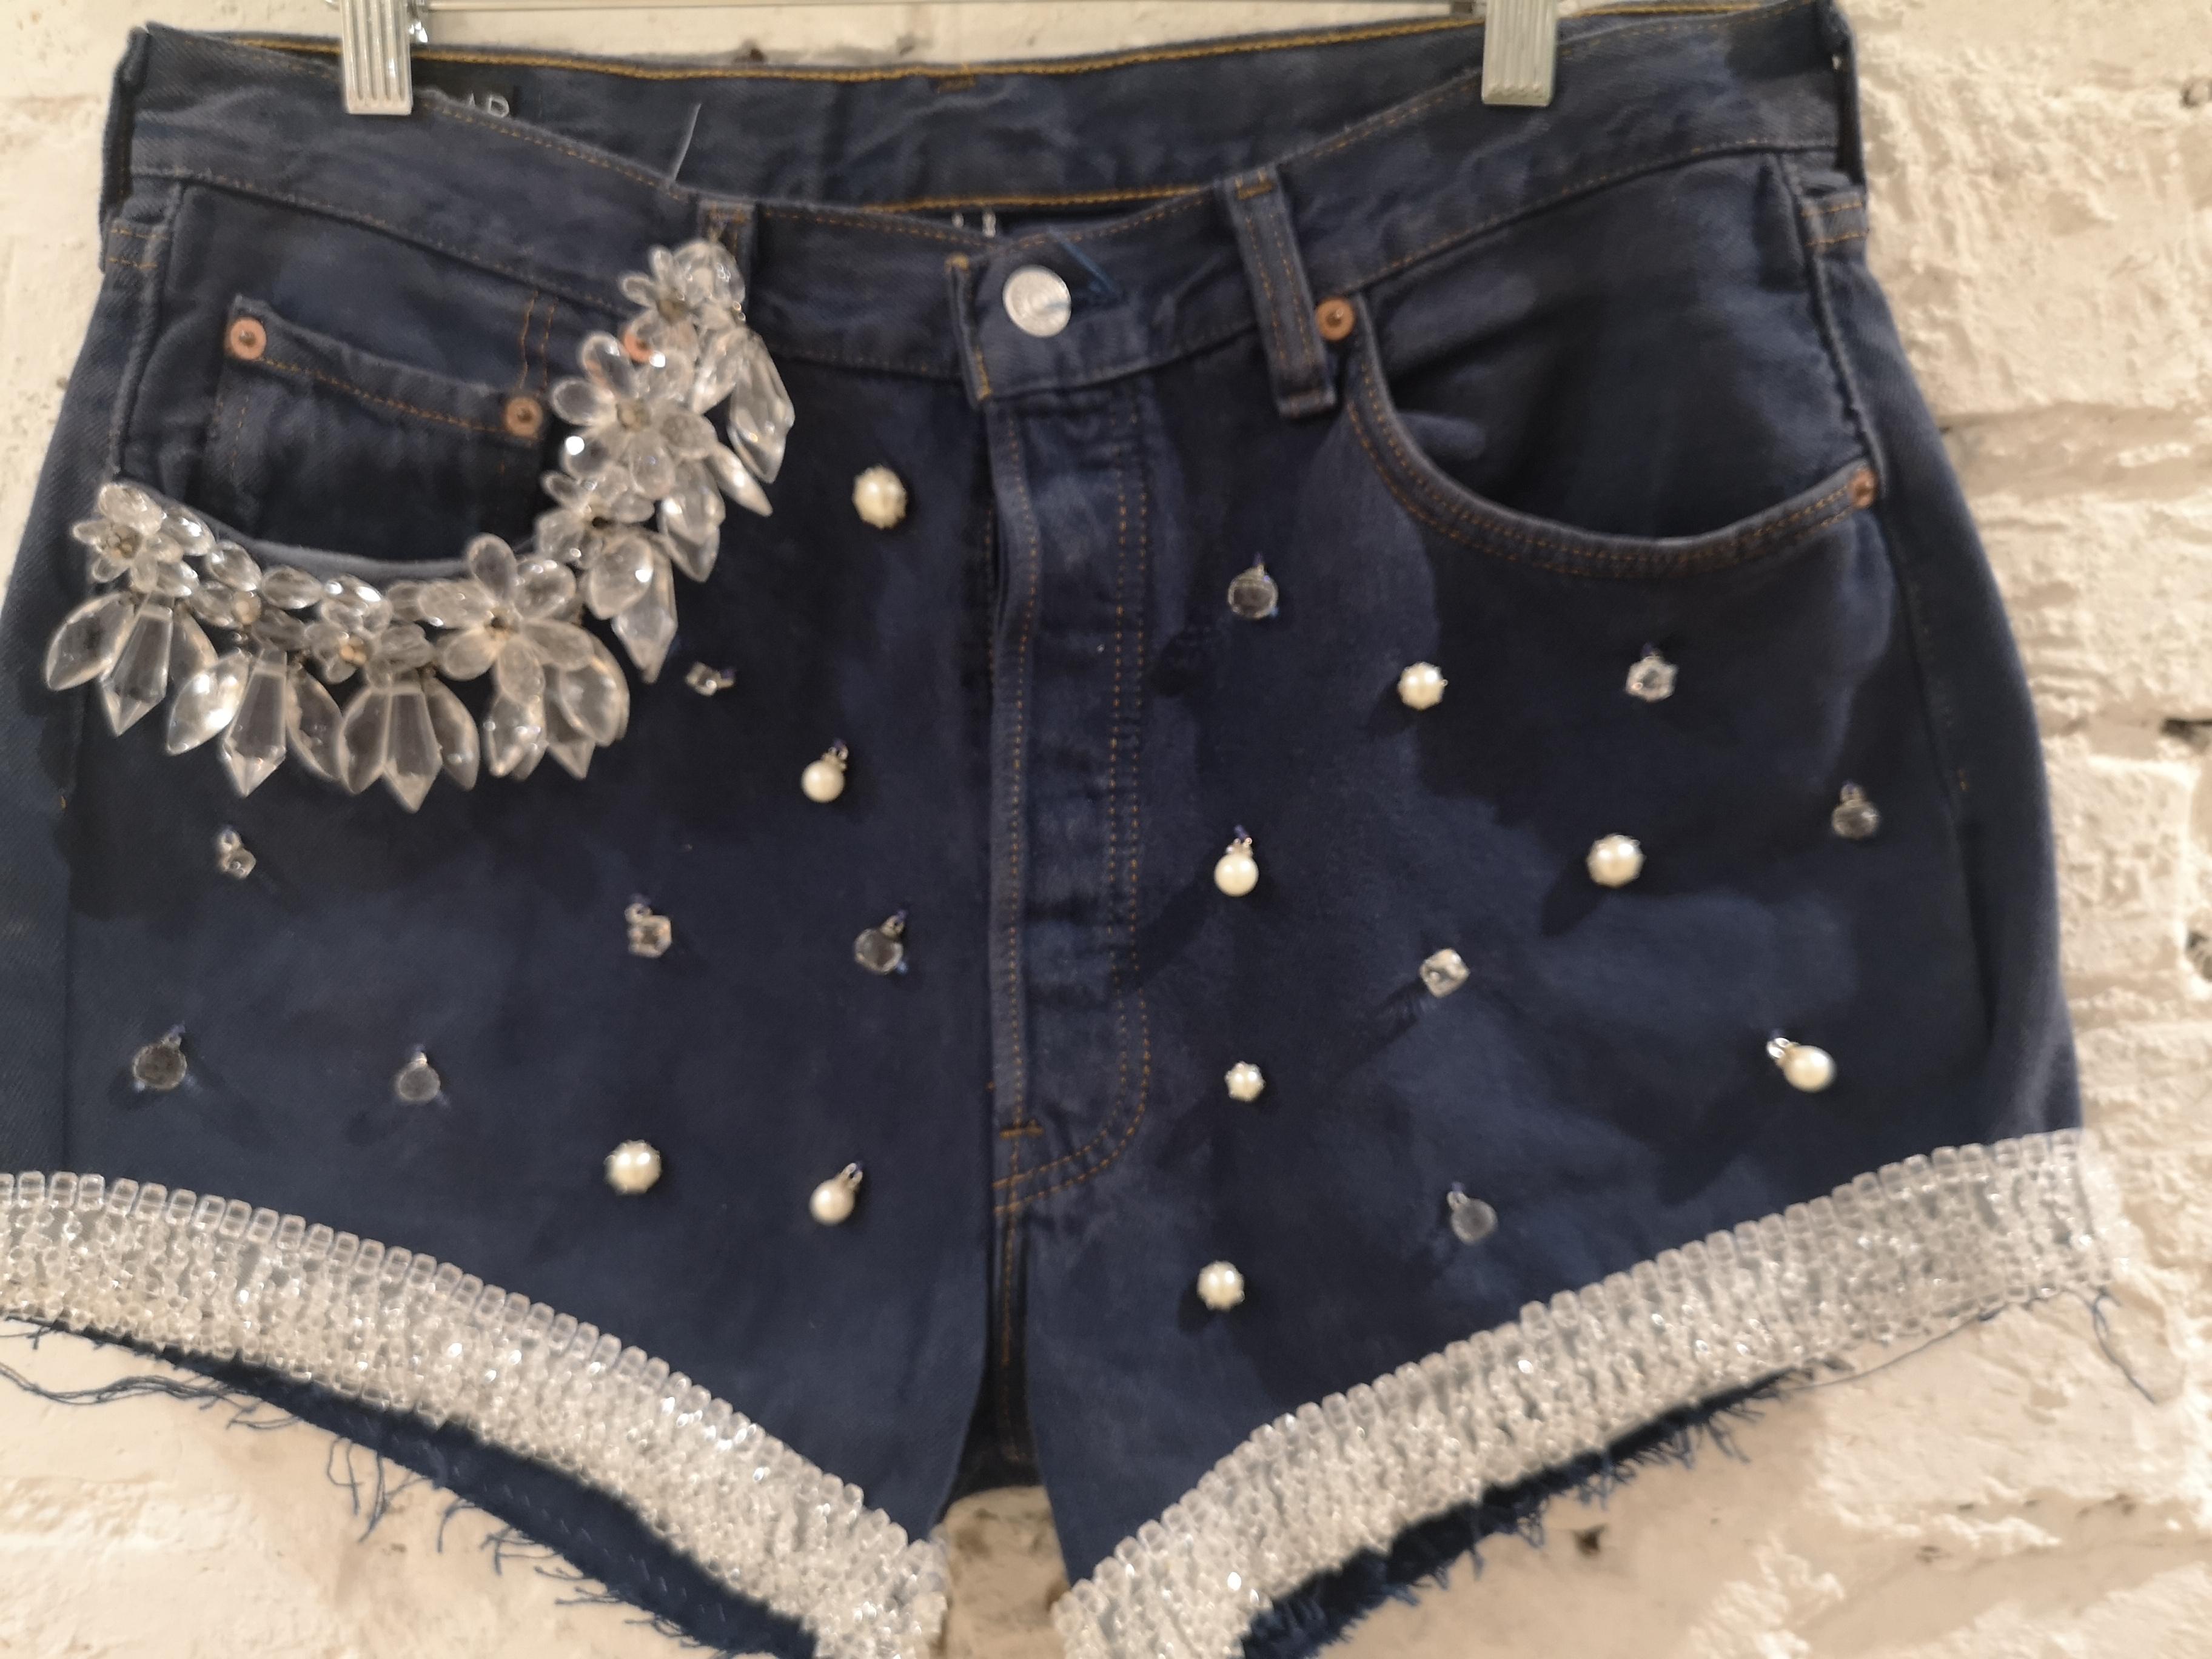 Blue denim SOAB shorts
vintage shorts recycled and customised totally handmade embellished with swarovsky crystal stones all over
composition: cotton
total lenght 34 cm
waist 84cm